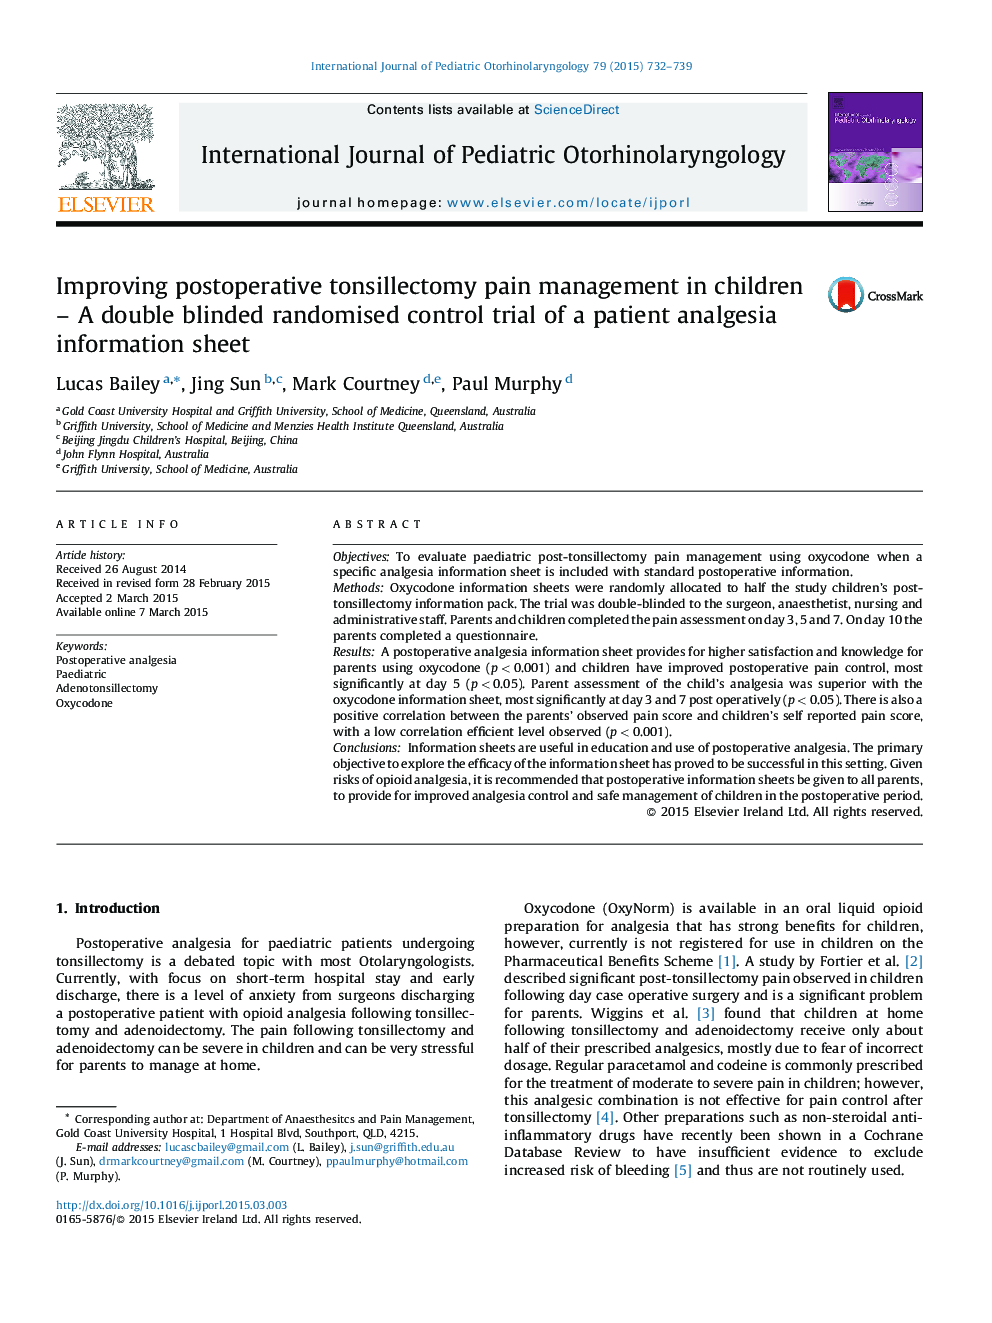 Improving postoperative tonsillectomy pain management in children – A double blinded randomised control trial of a patient analgesia information sheet